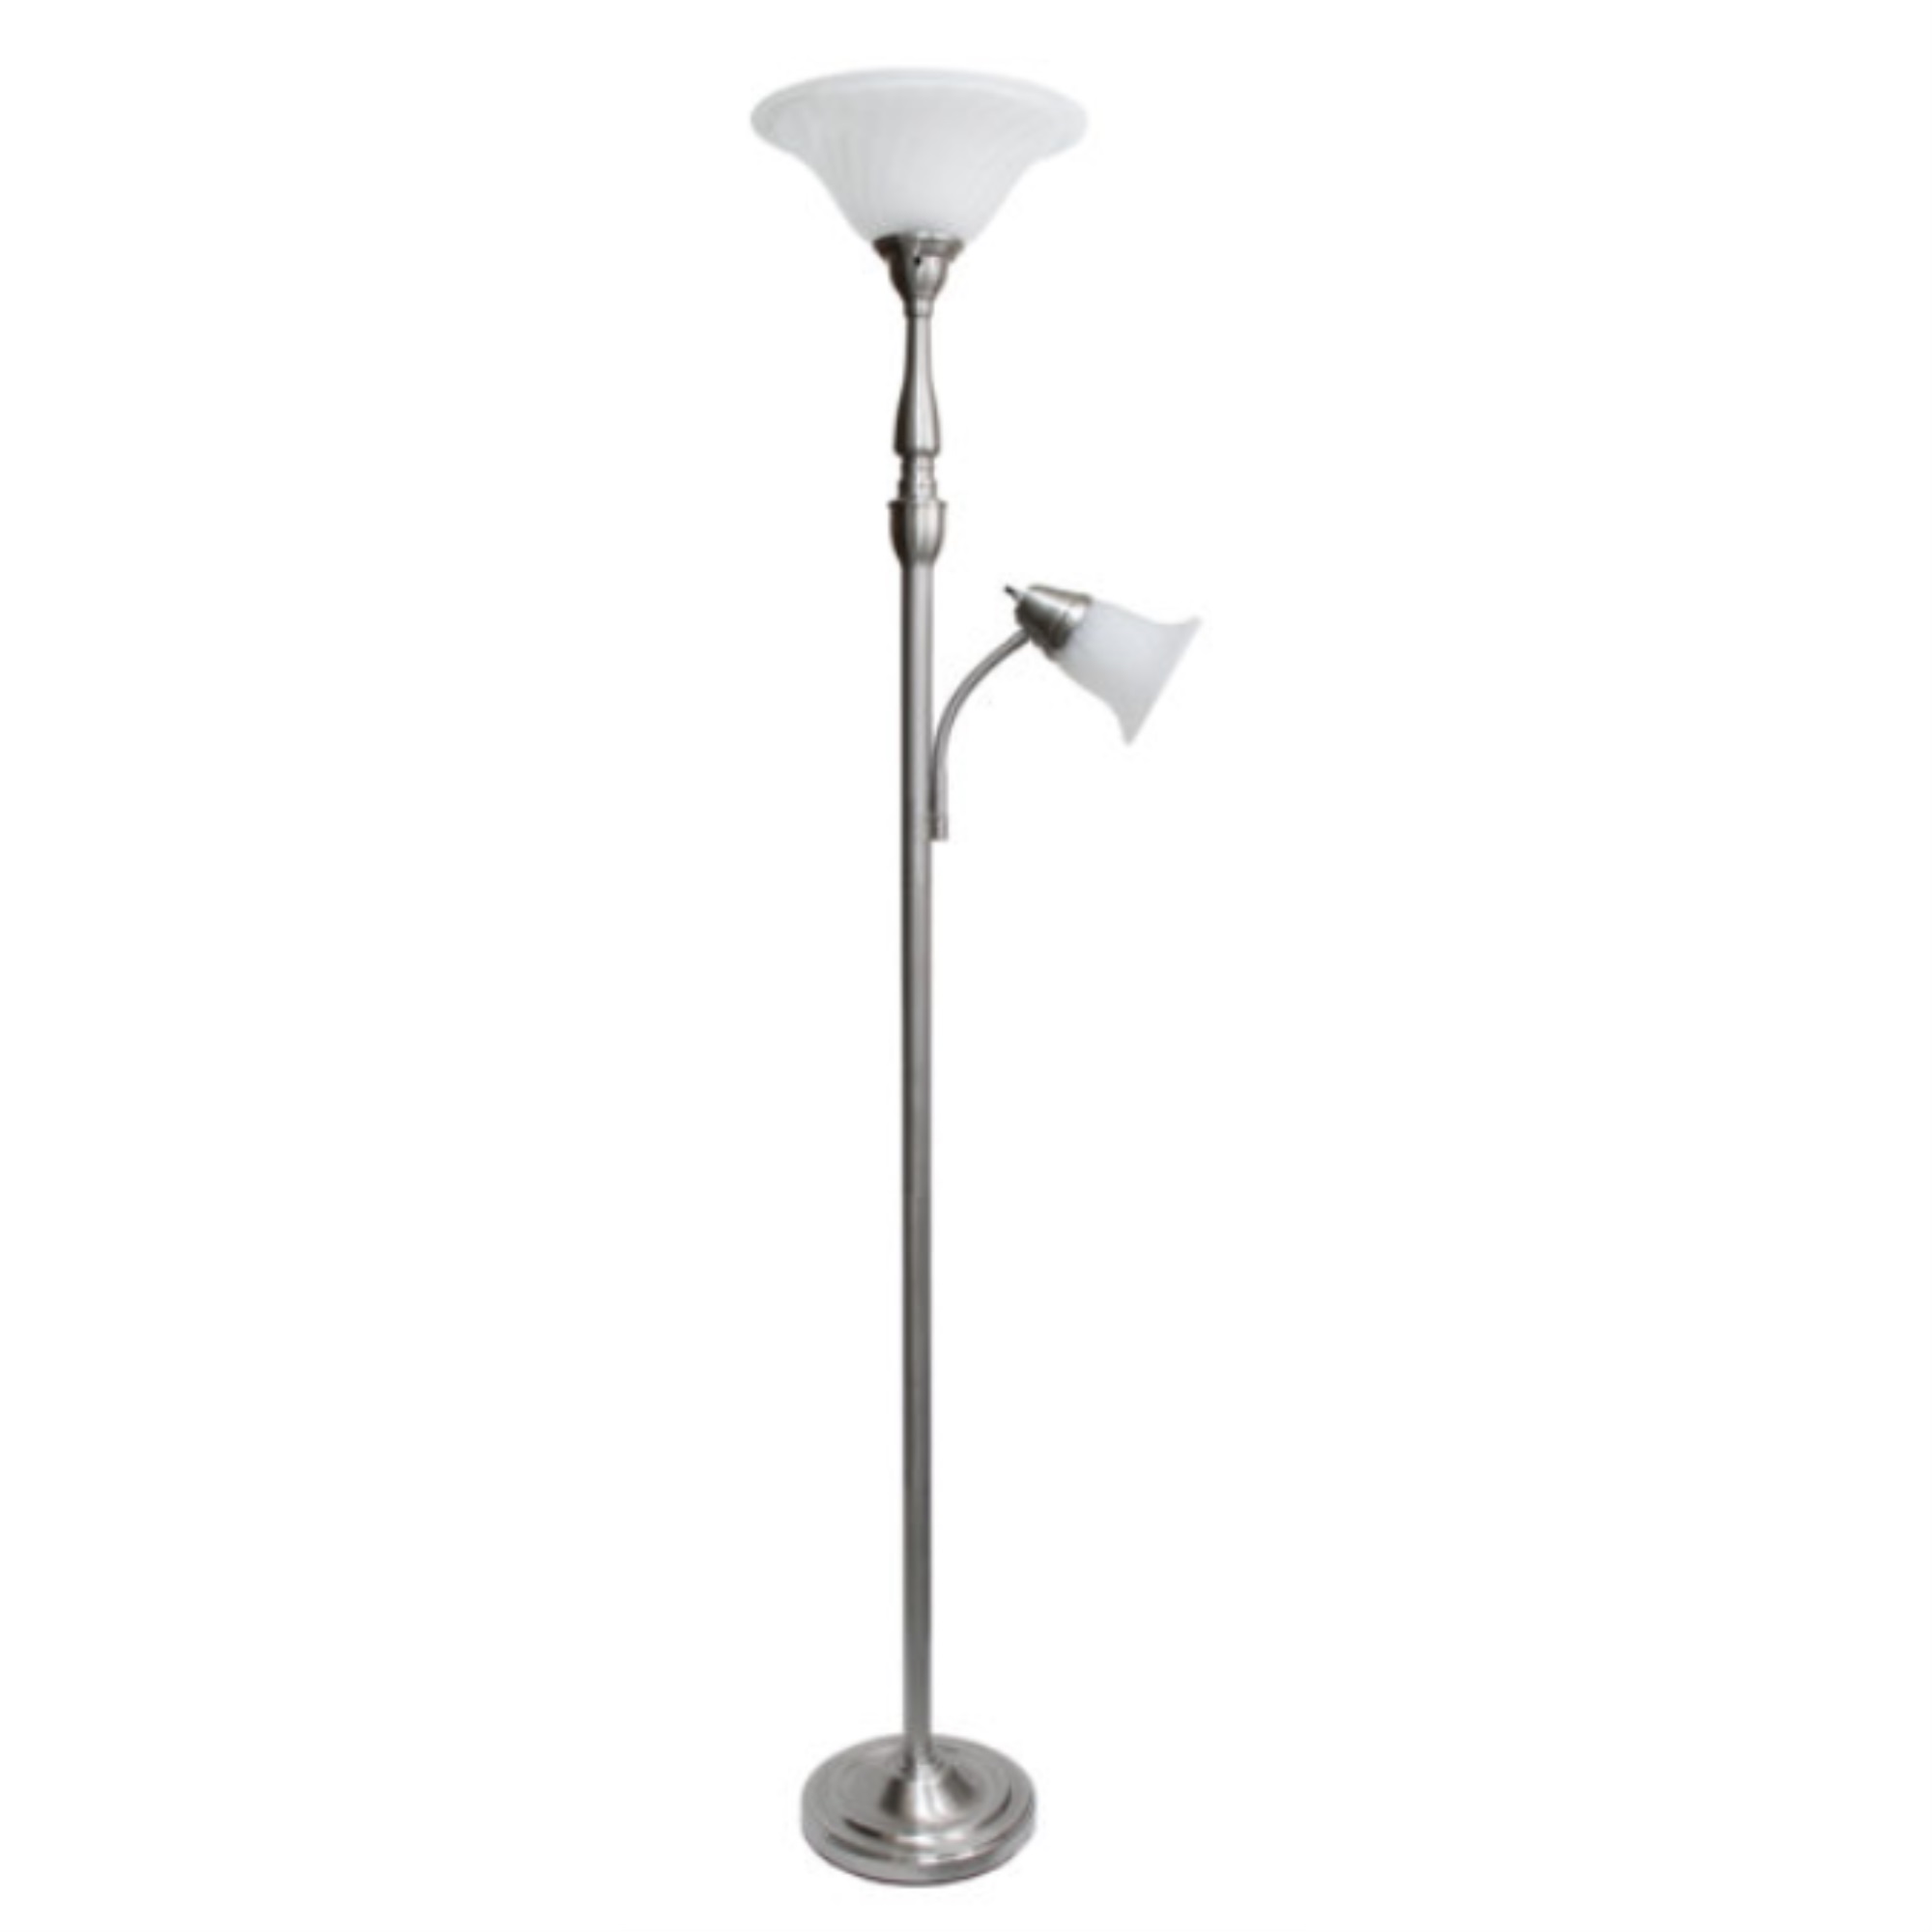 Elegant Designs 2 Light Mother Daughter Floor Lamp with White Marble Glass, Brushed Nickel